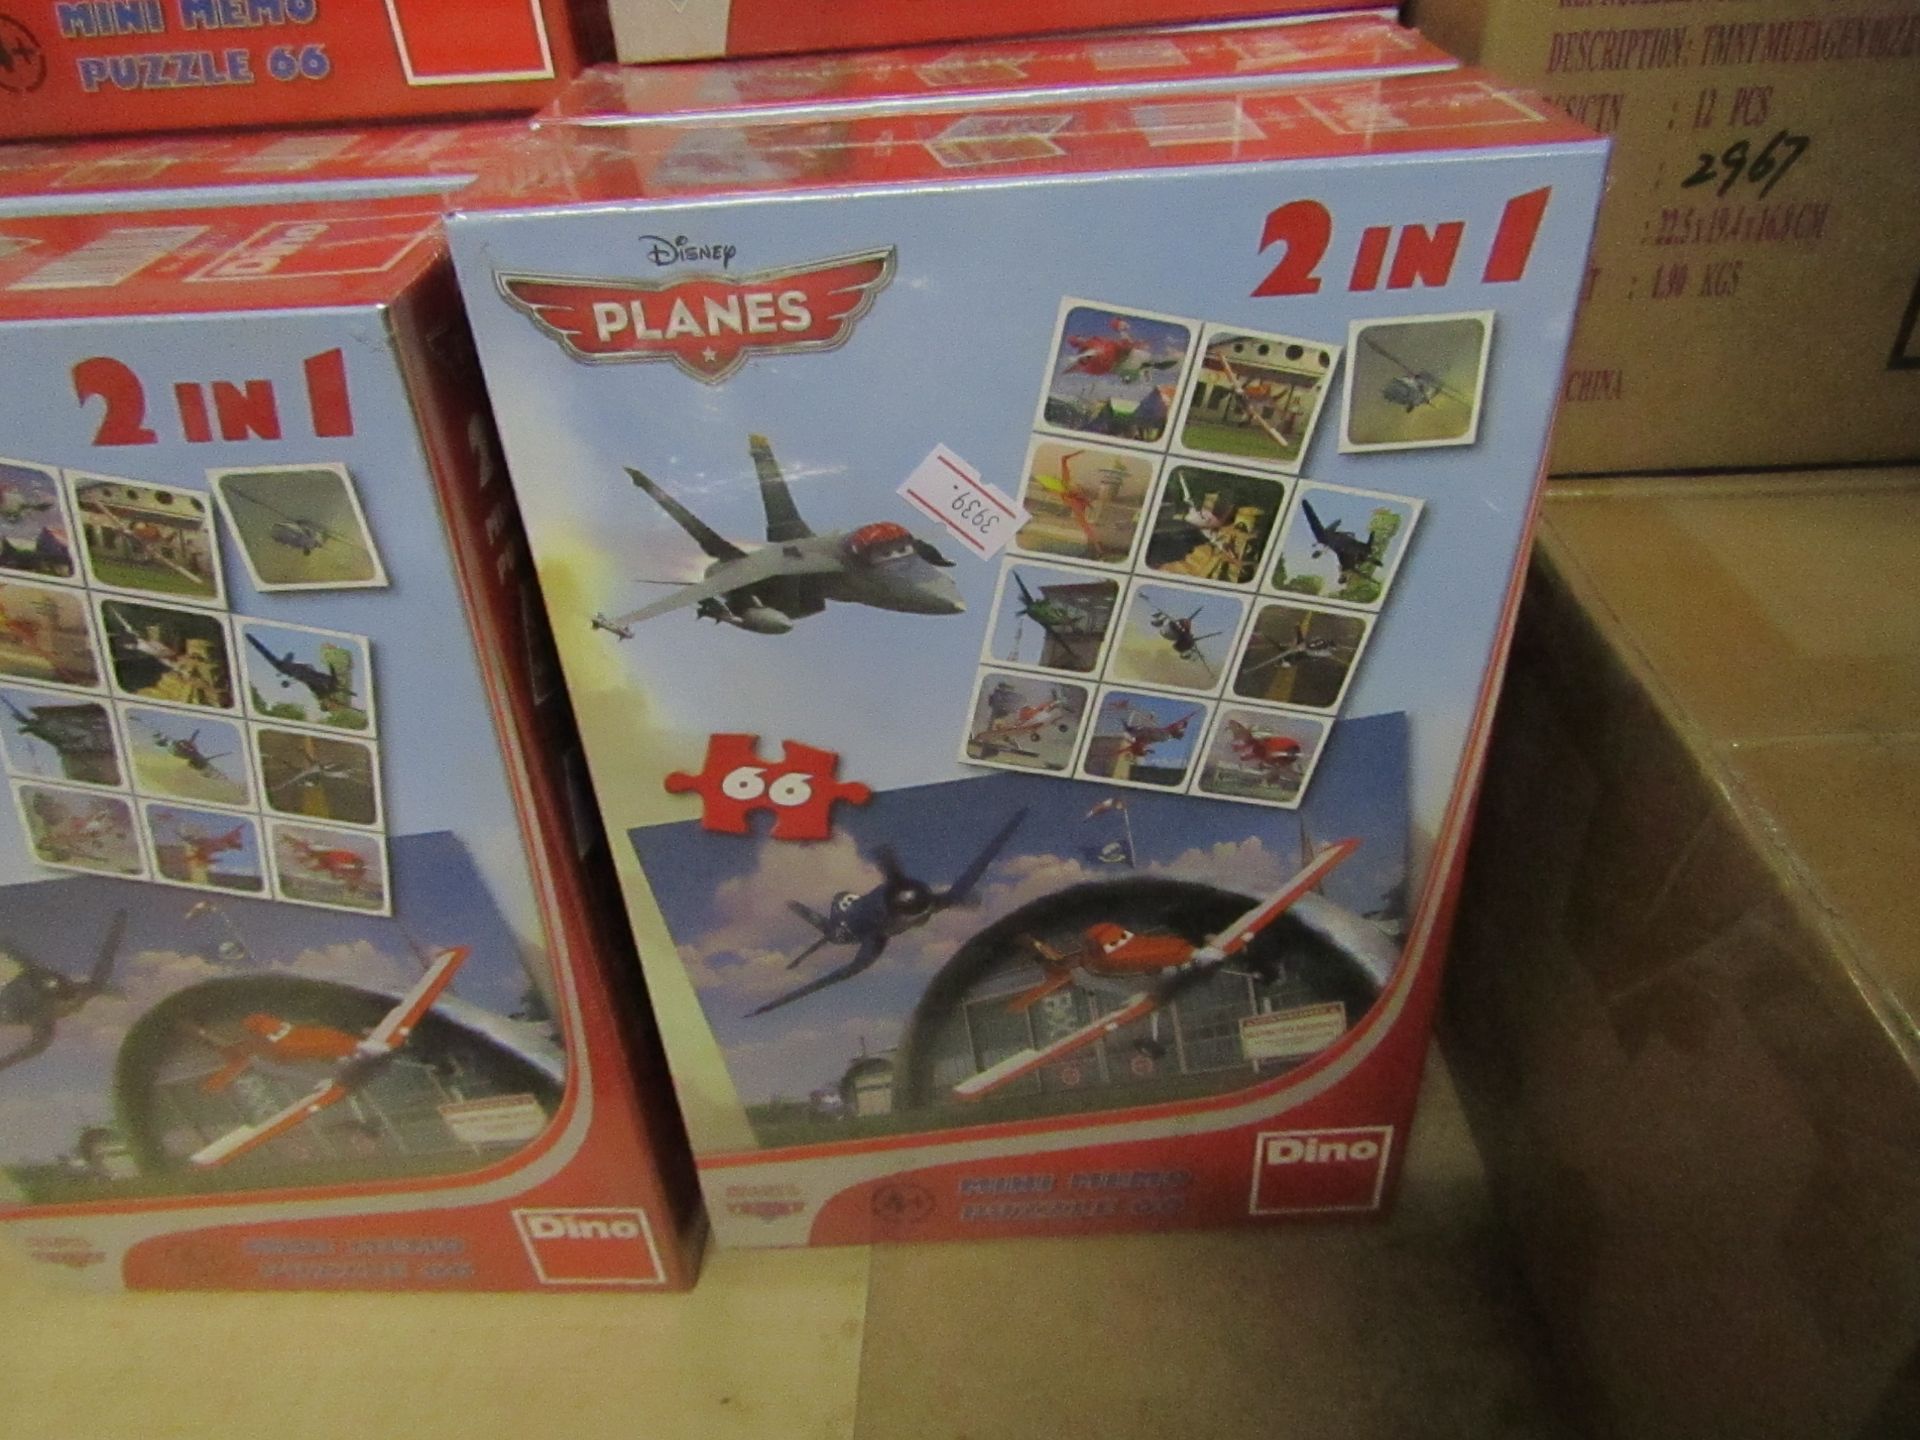 4x Disney Planes 2 in 1 Mini Puzzles, new and still sealed